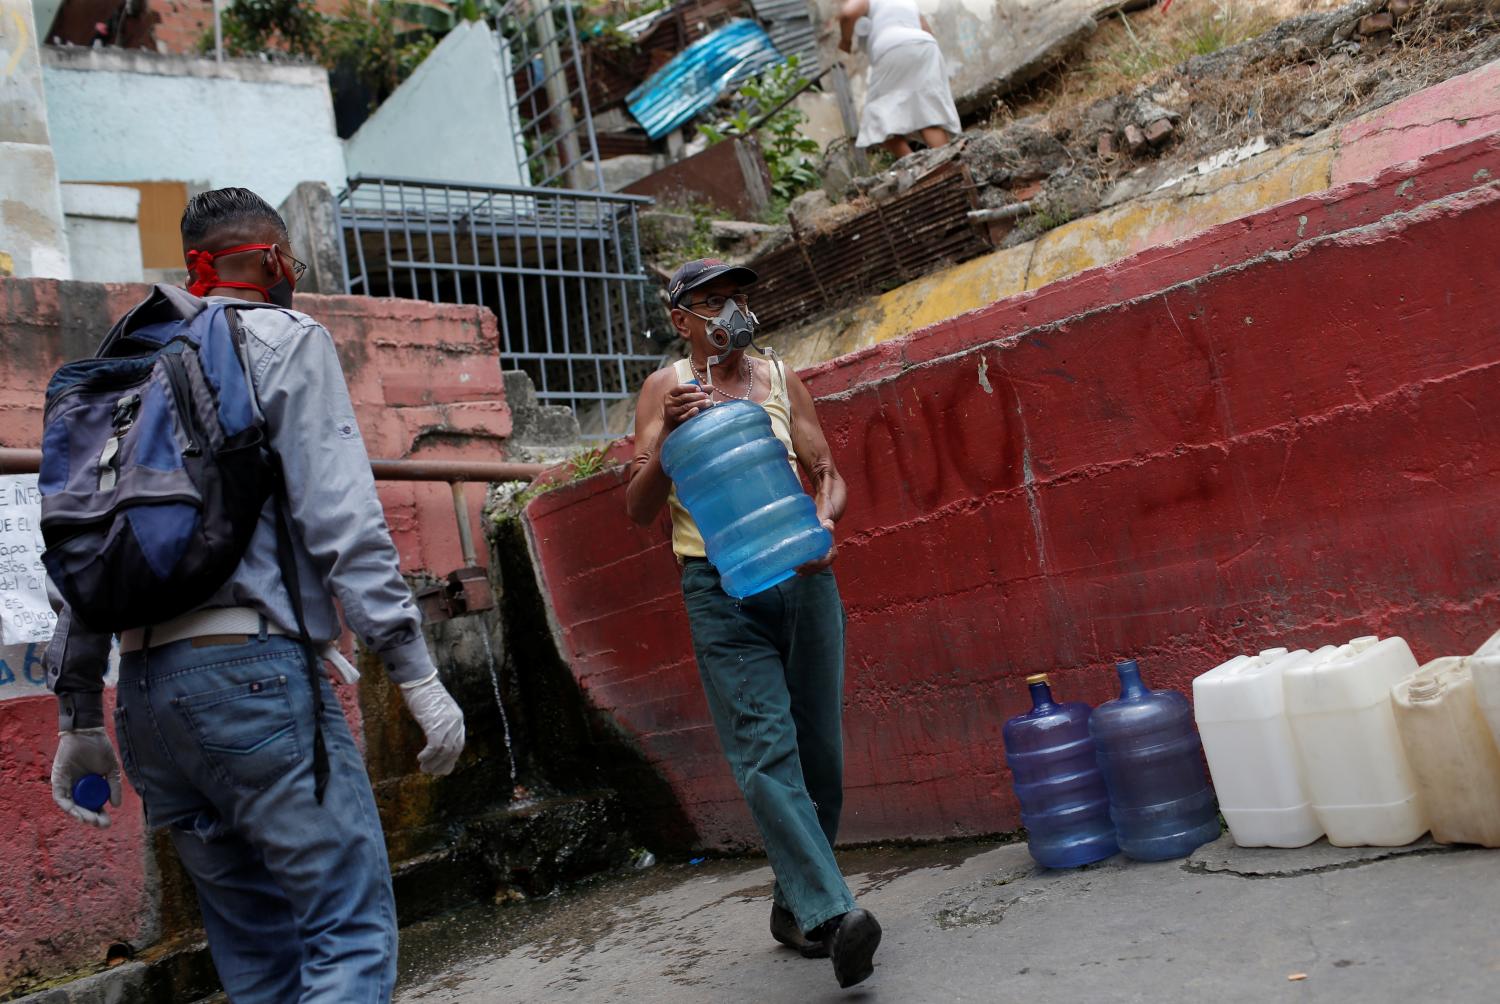 An elder carry a plastic container filled with water from a pipe in a street of a slum during a nationwide quarantine due to coronavirus disease (COVID-19) outbreak in Caracas, Venezuela April 2, 2020. Picture taken April 2, 2020. REUTERS/Manaure Quintero